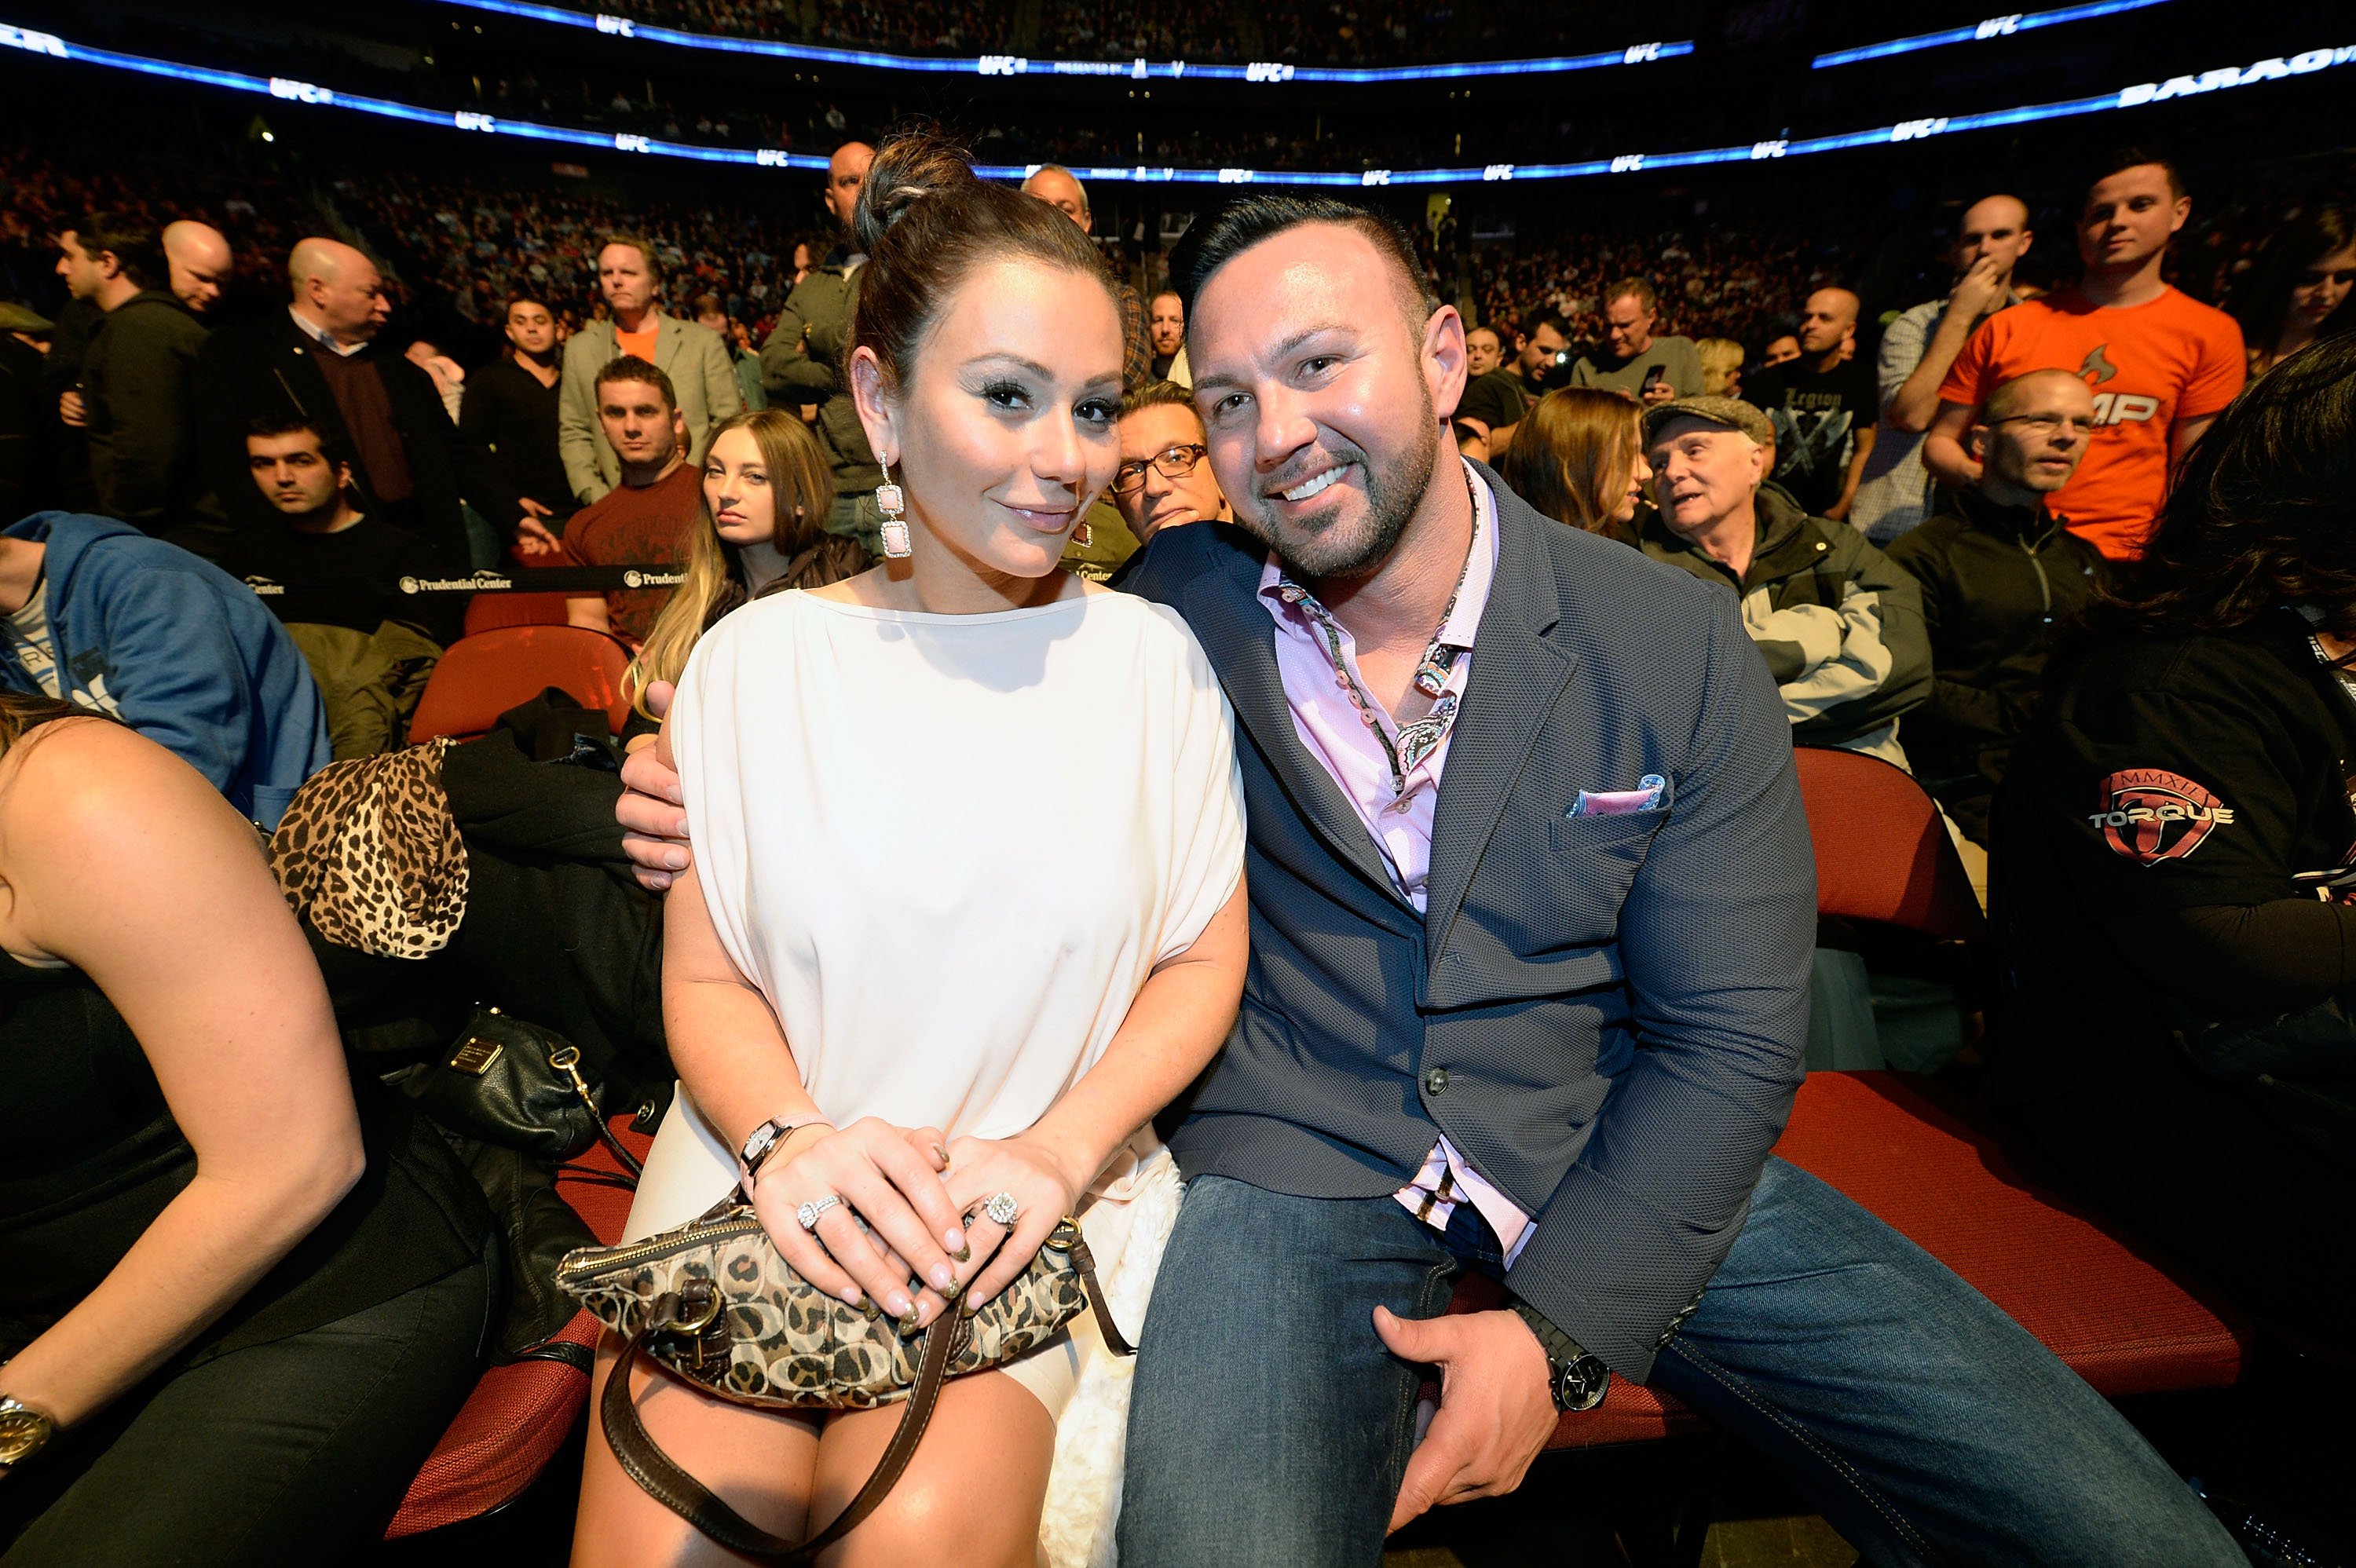 Jenni "JWoww" Farley and Roger Mathews attend the bantamweight championship fight between Renan Barao and Urijah Faber during the UFC 169 event at the Prudential Center on February 1, 2014 